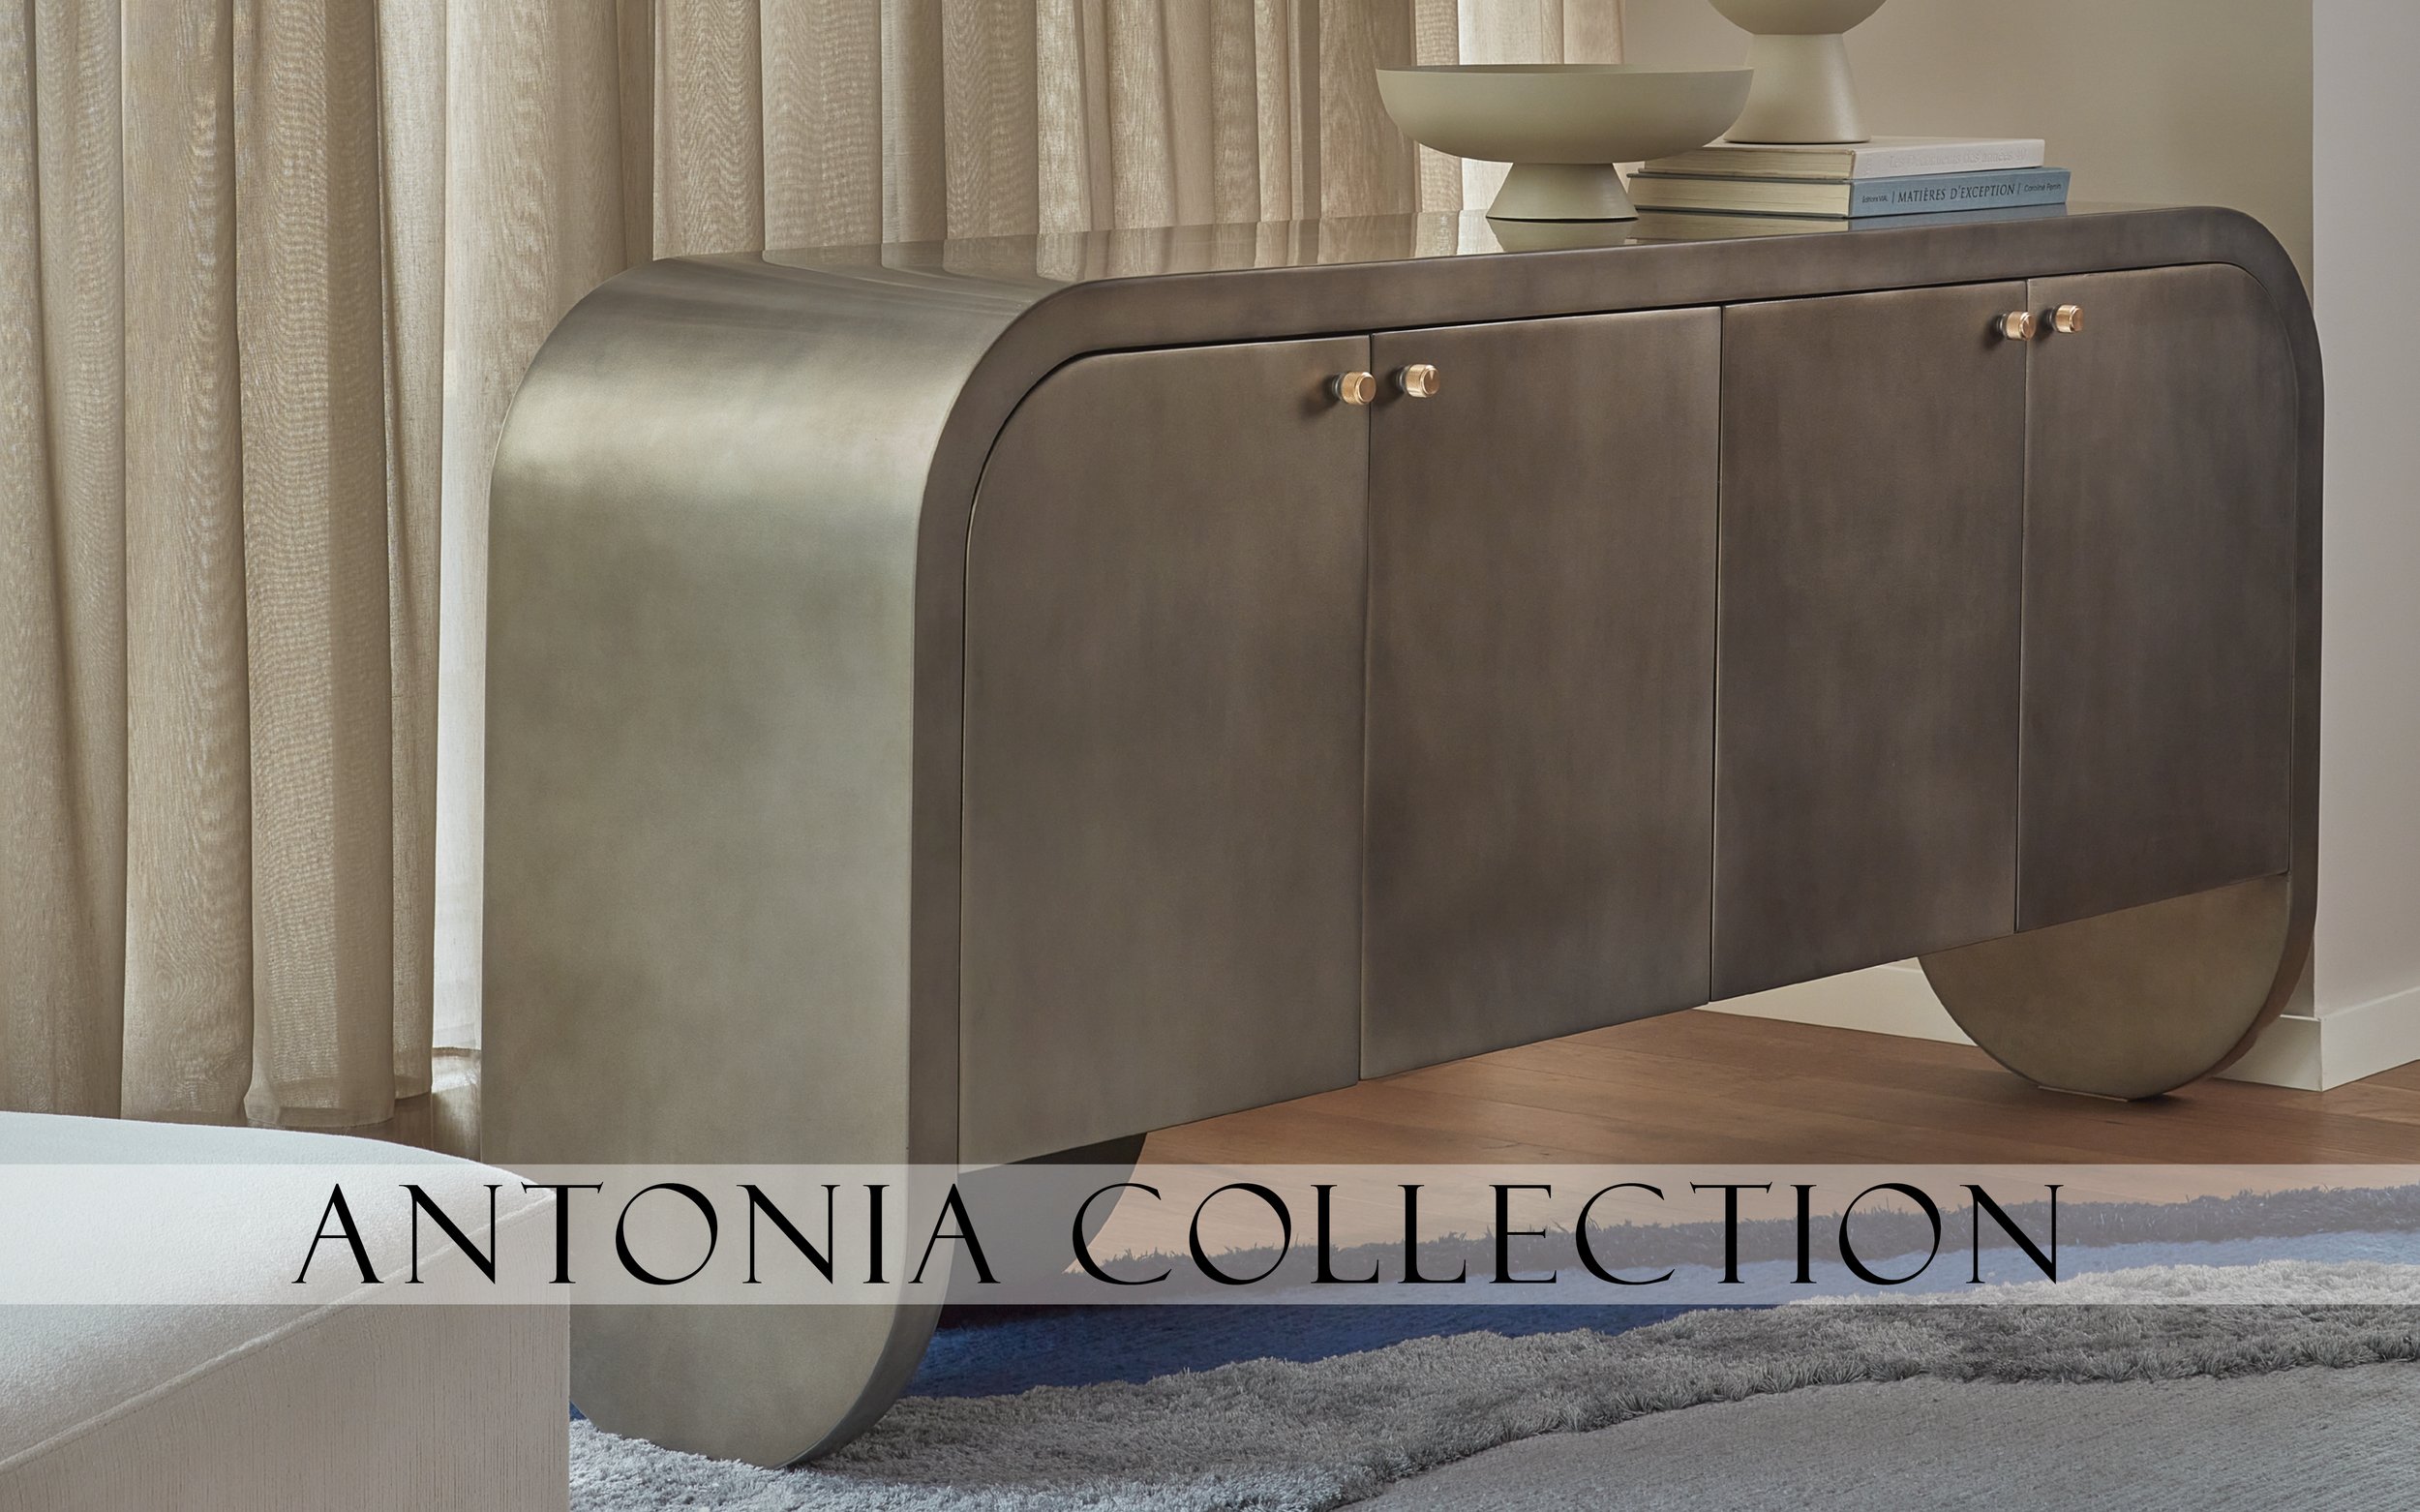 03 ANTONIA COLLECTION BANNER.png